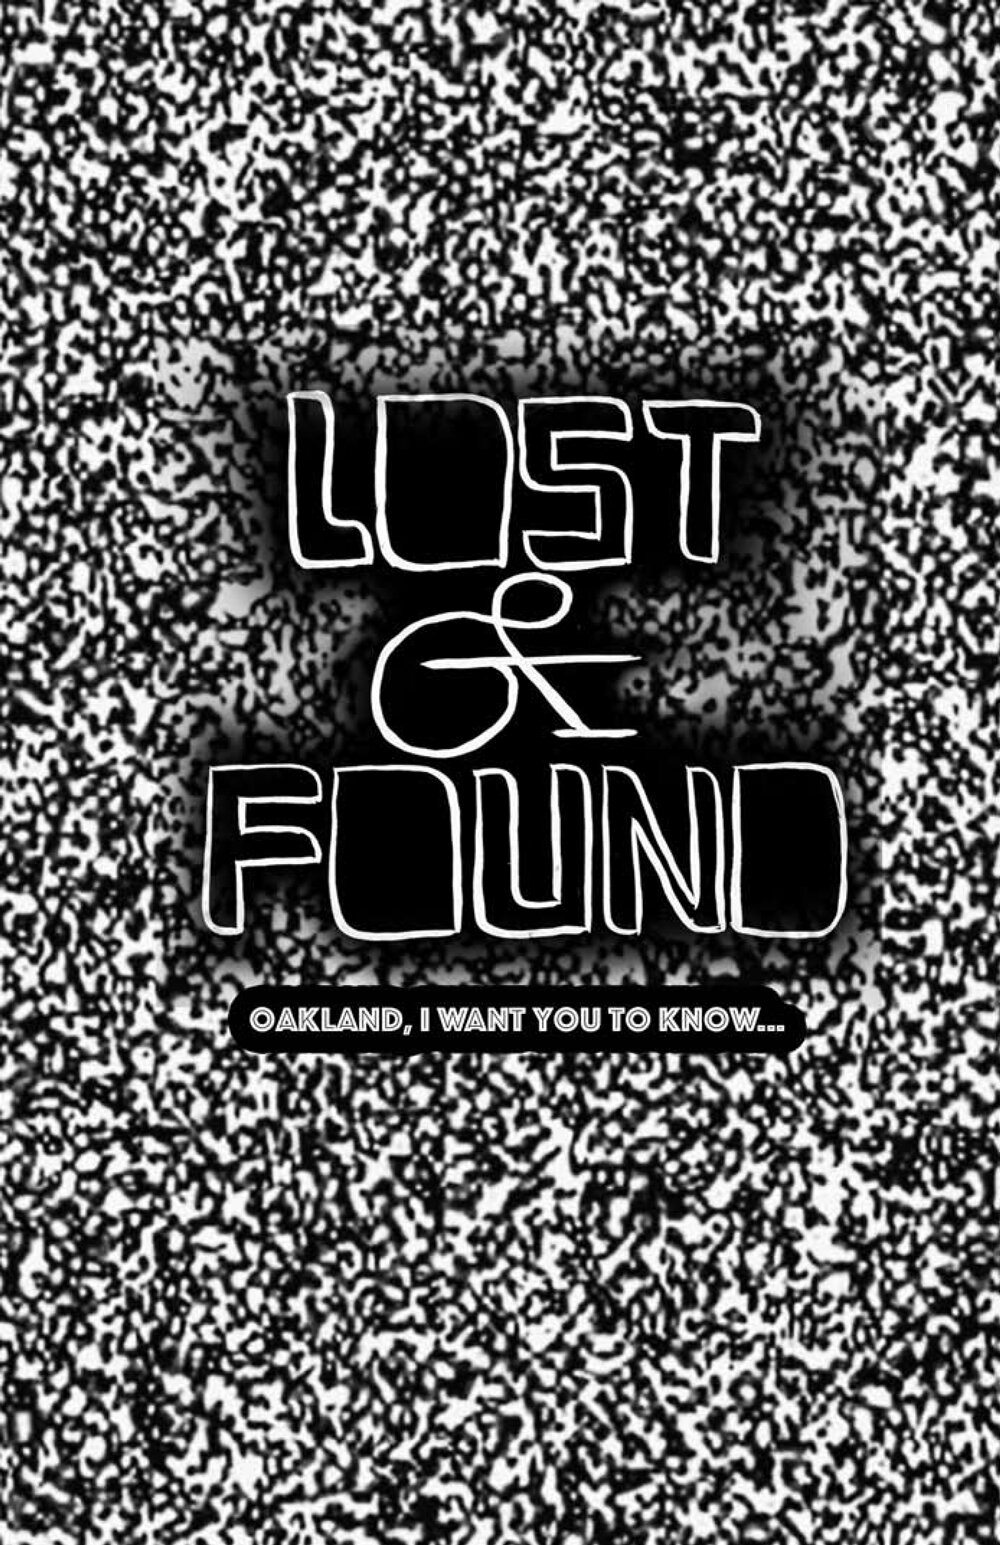 Lost &amp; Found – a collaboration produced by Rock Paper Scissors Collective